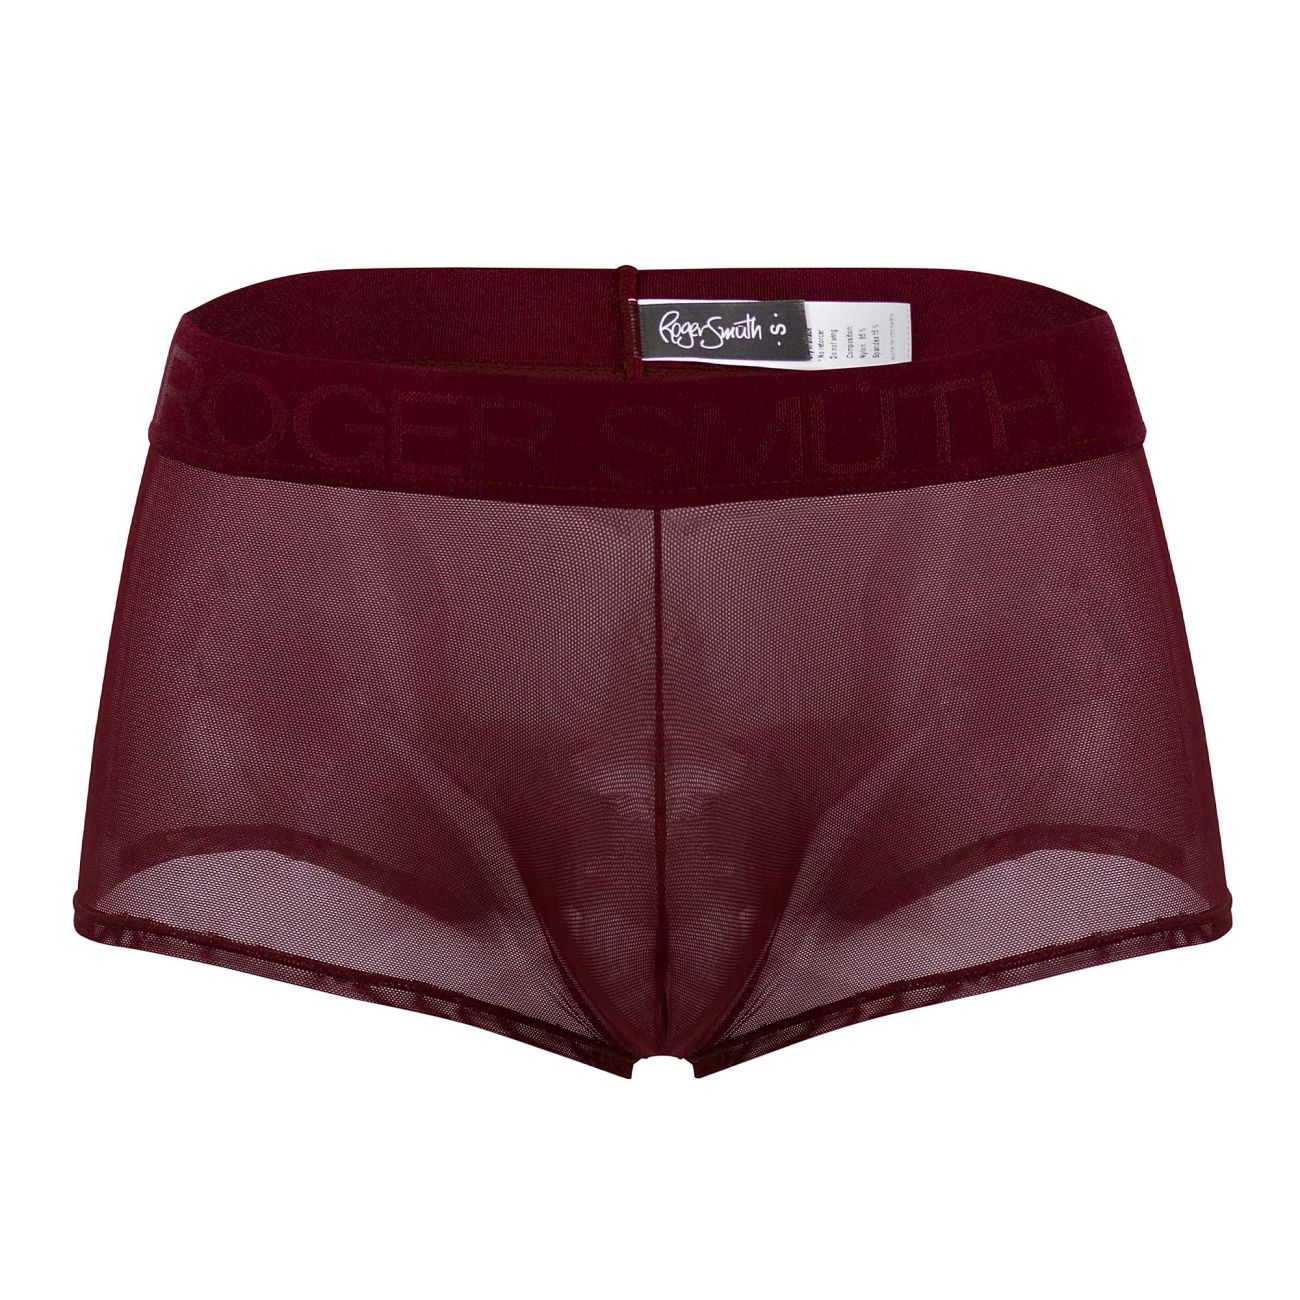 Roger Smuth RS060 Trunks